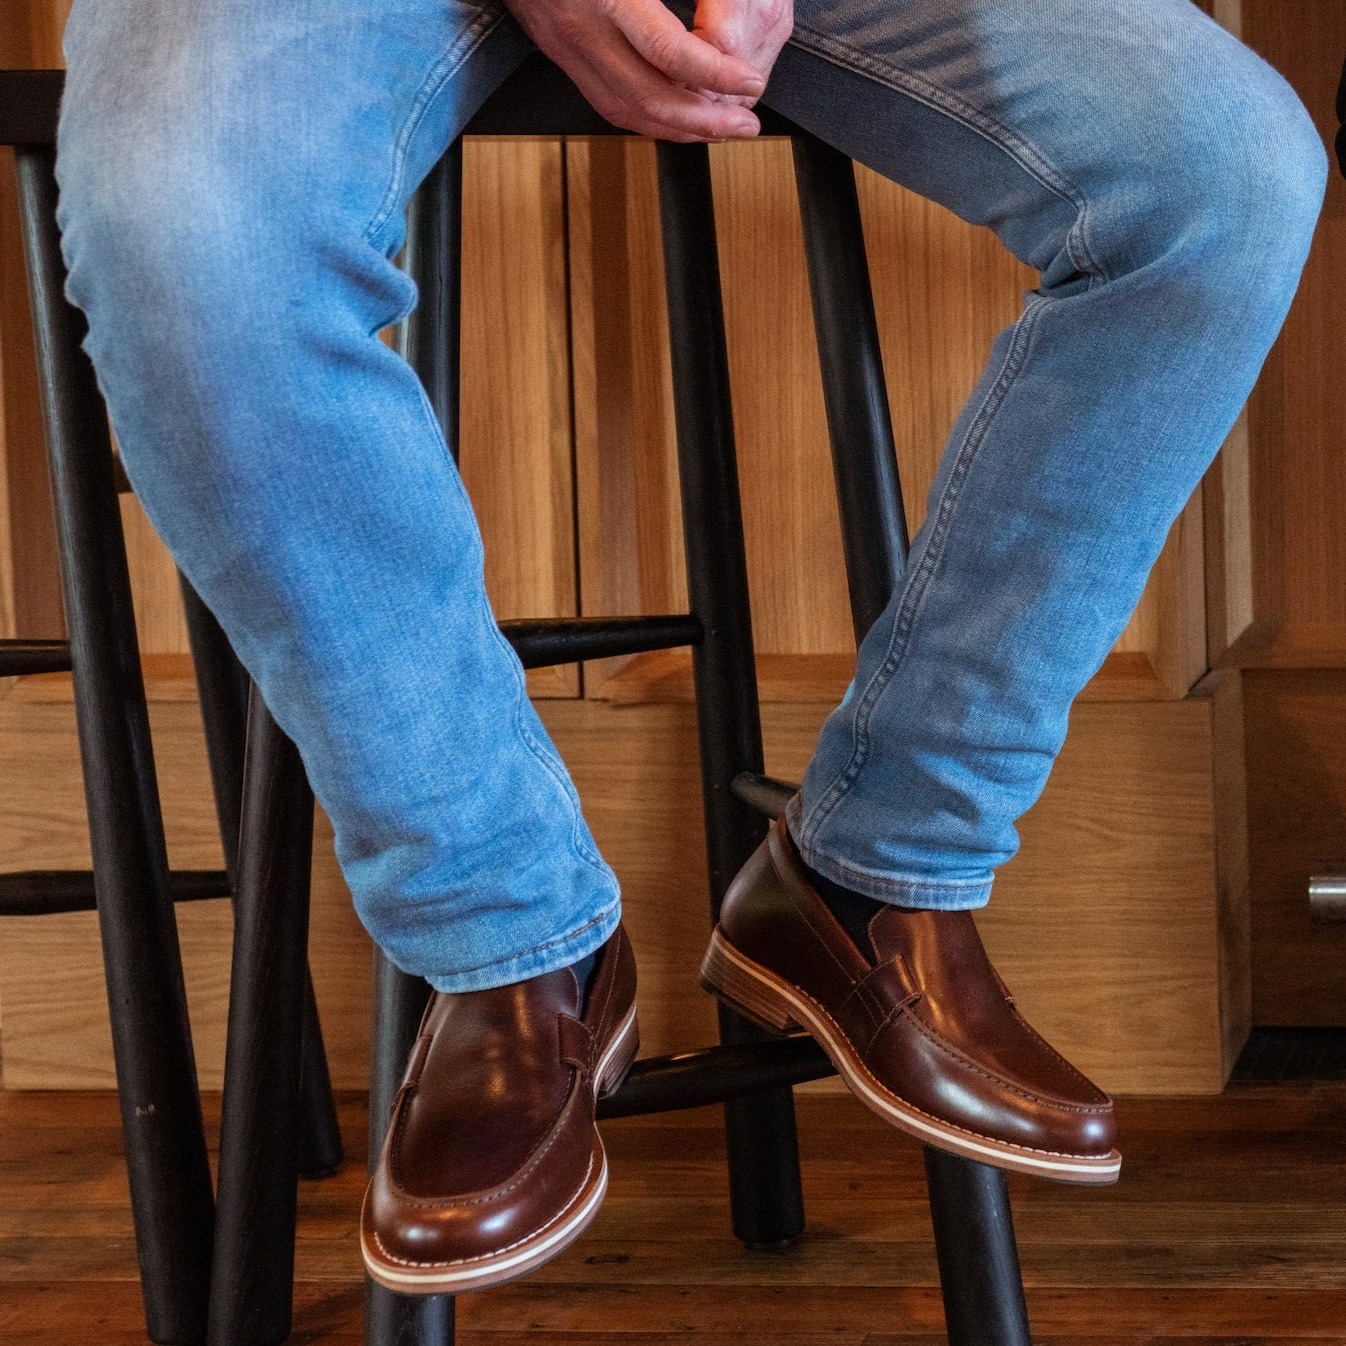 HELM - Man wearing Wilson Brown and jeans sitting on stool